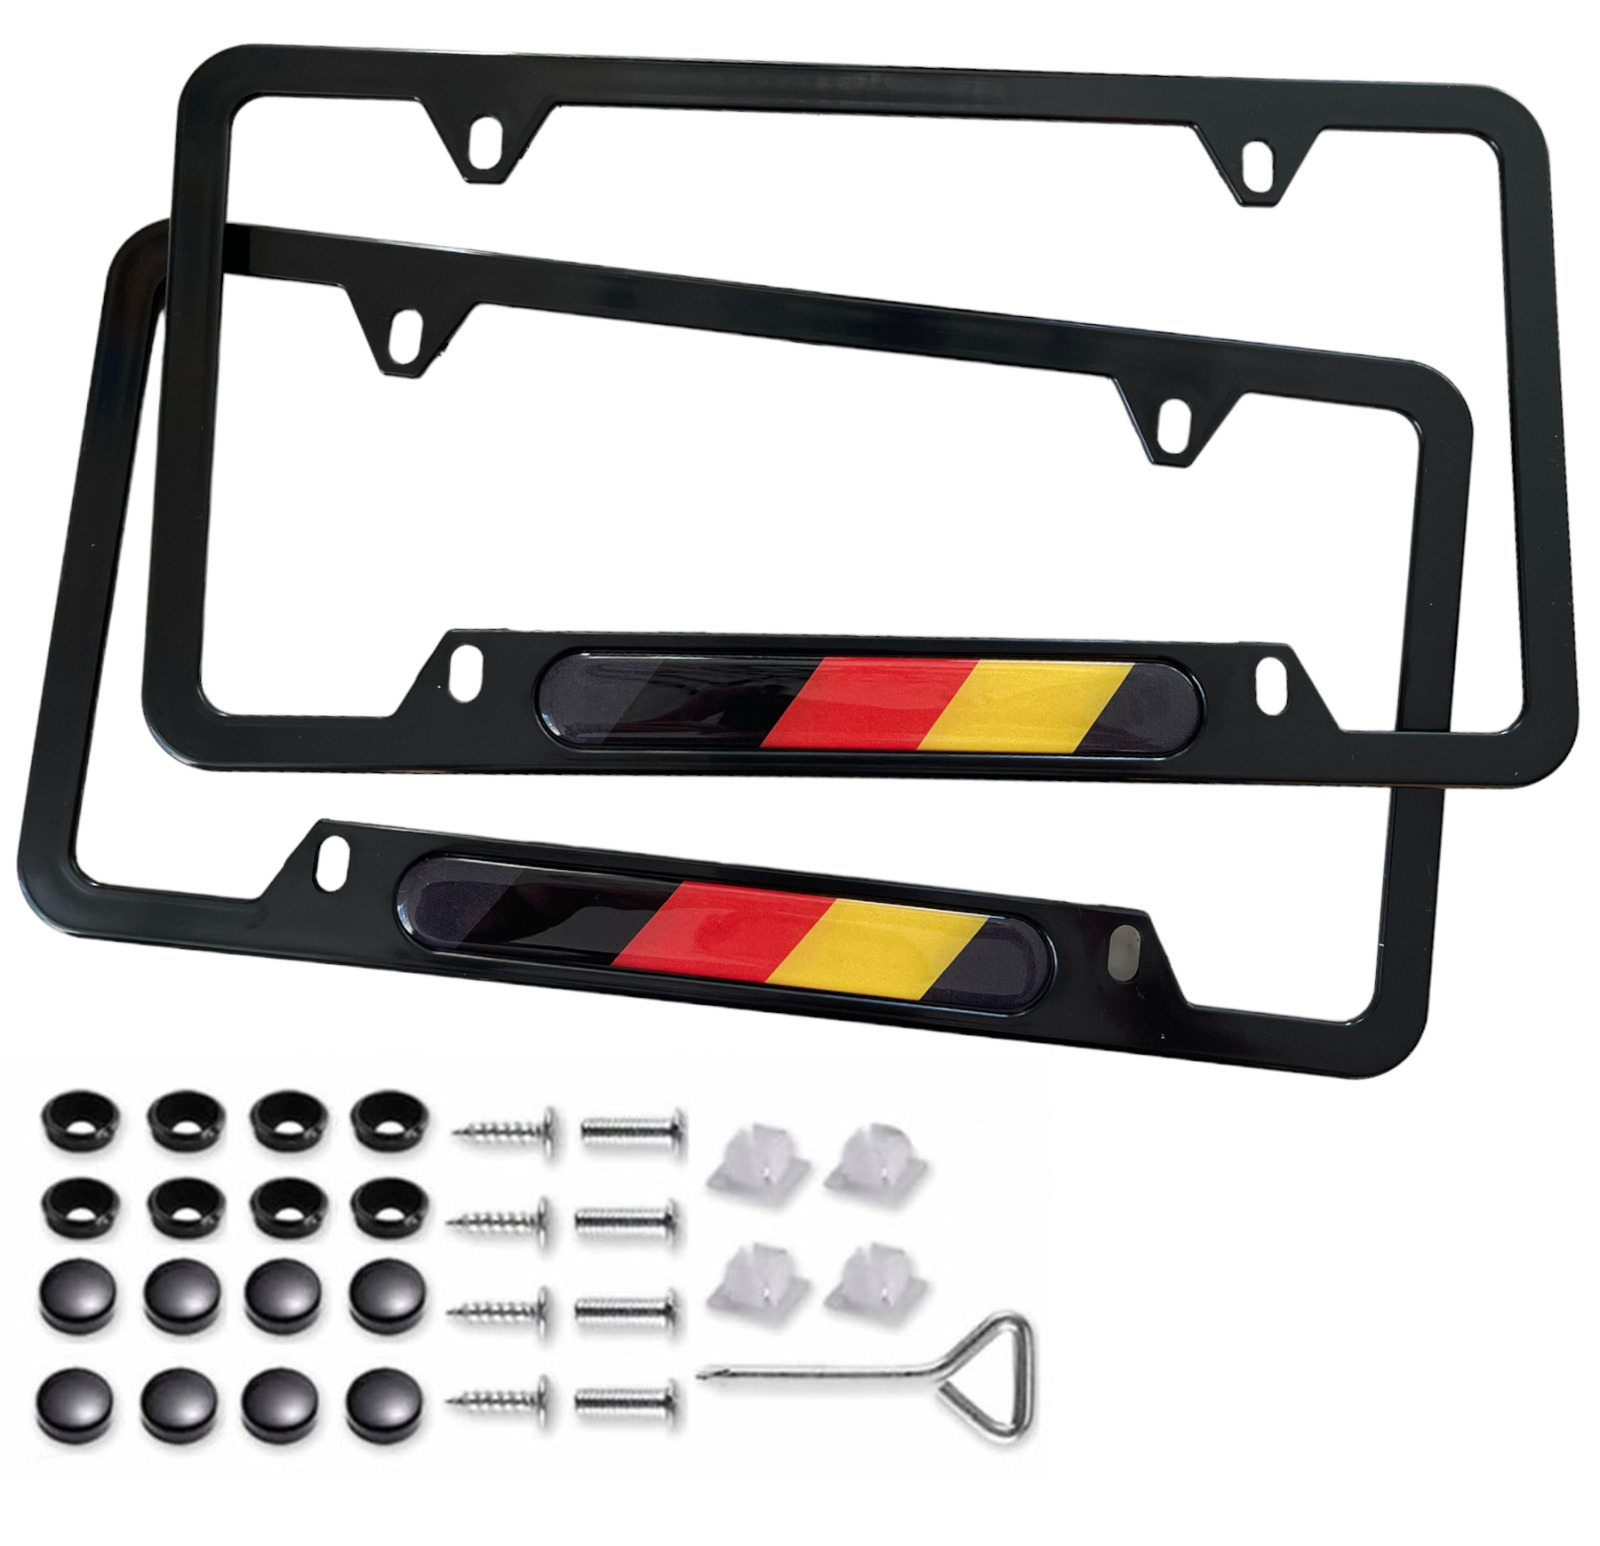 Metal License Plate Frame for Porsche Cayenne Macan Taycan 911 Germany Edition